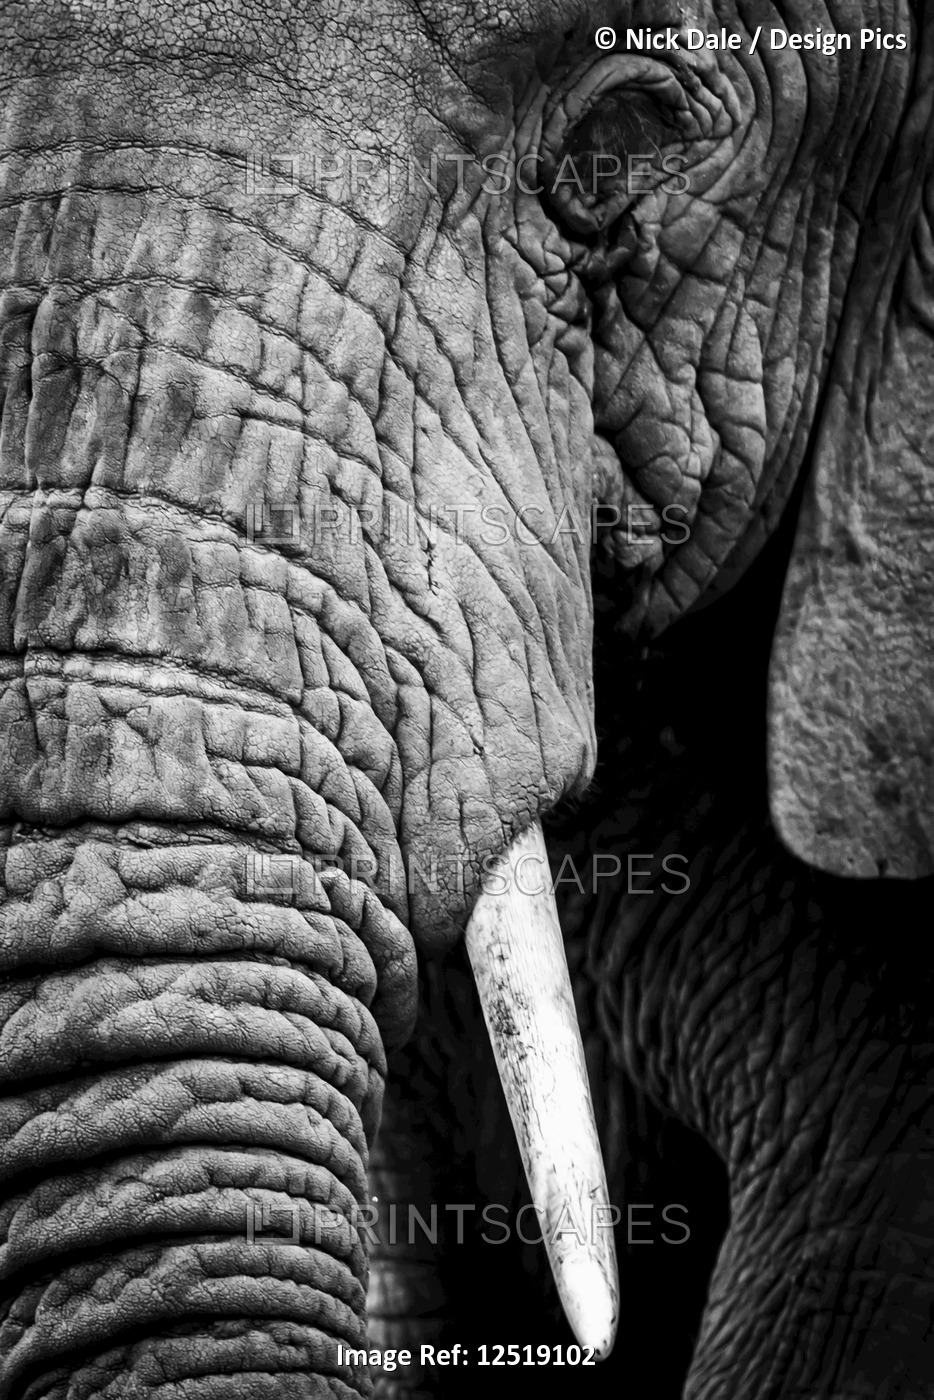 An African elephant (Loxodonta africana) stares at the camera, showing its ...